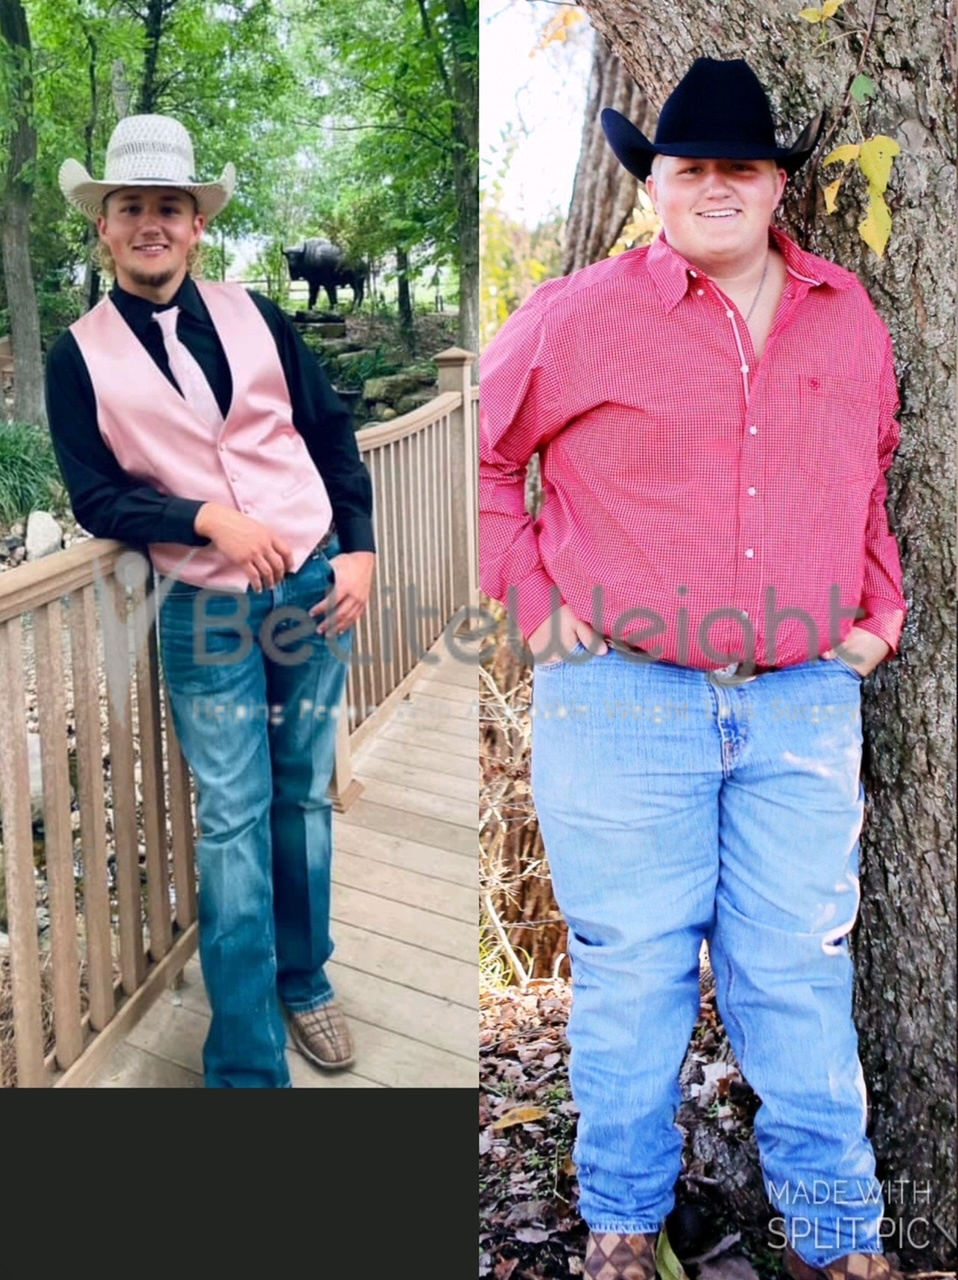 Sleeve Gastrectomy Before and After